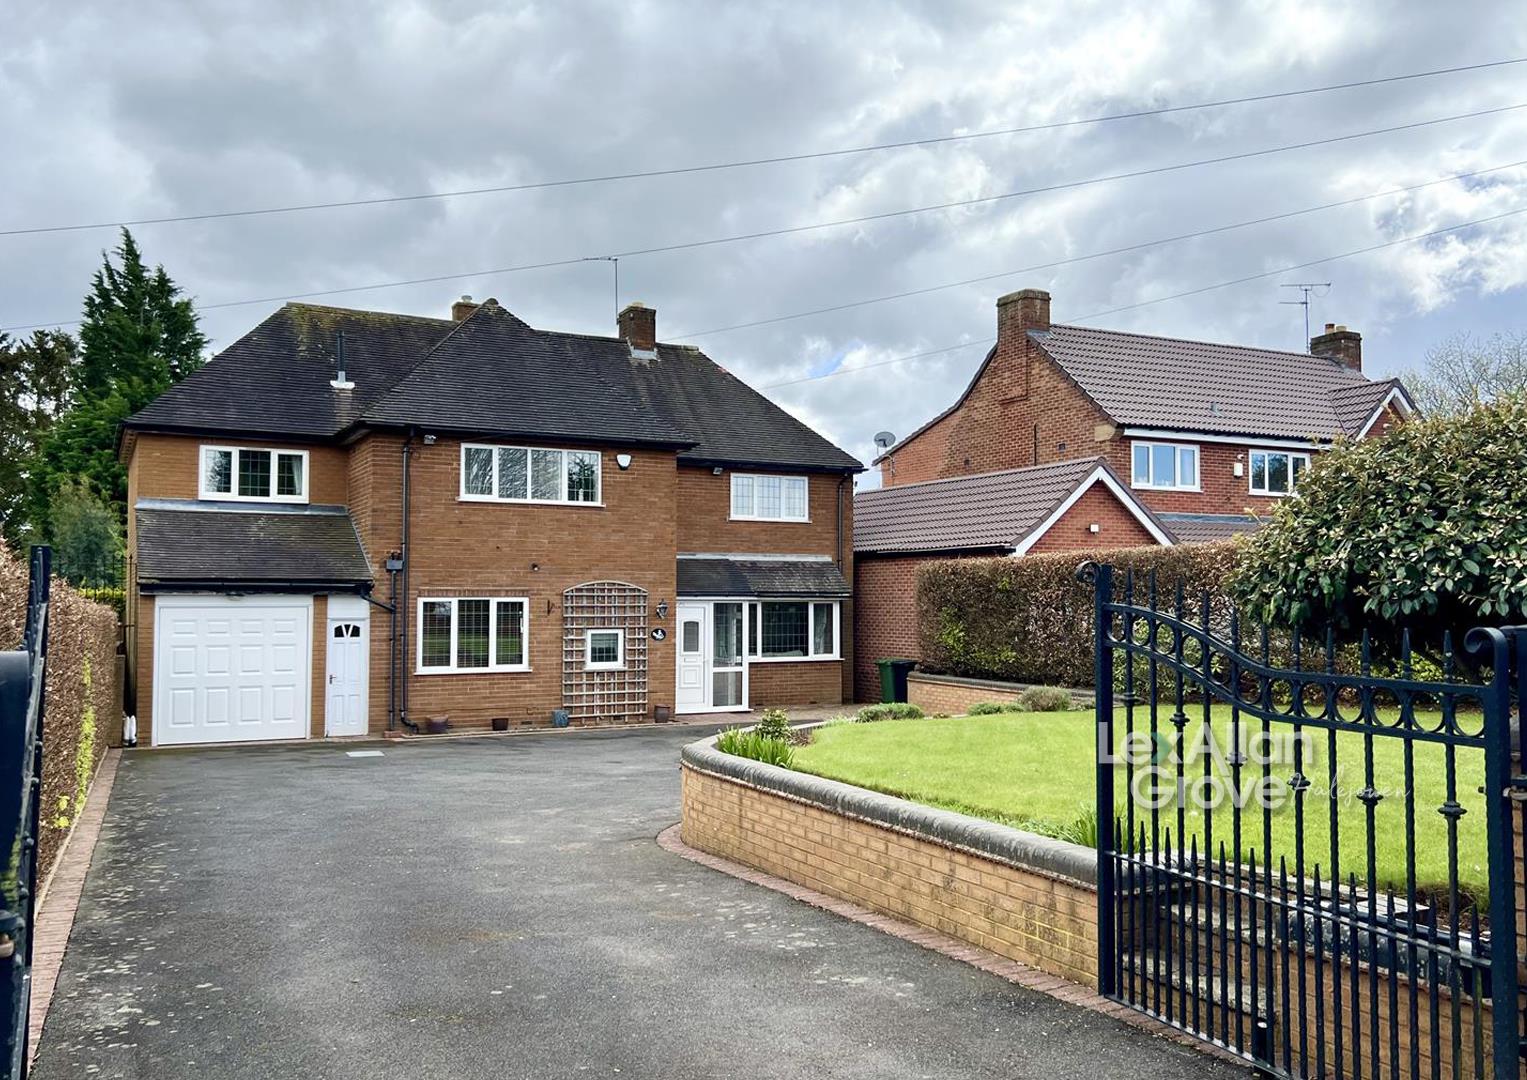 4 bed detached house for sale in Bromsgrove Road, Halesowen - Property Image 1